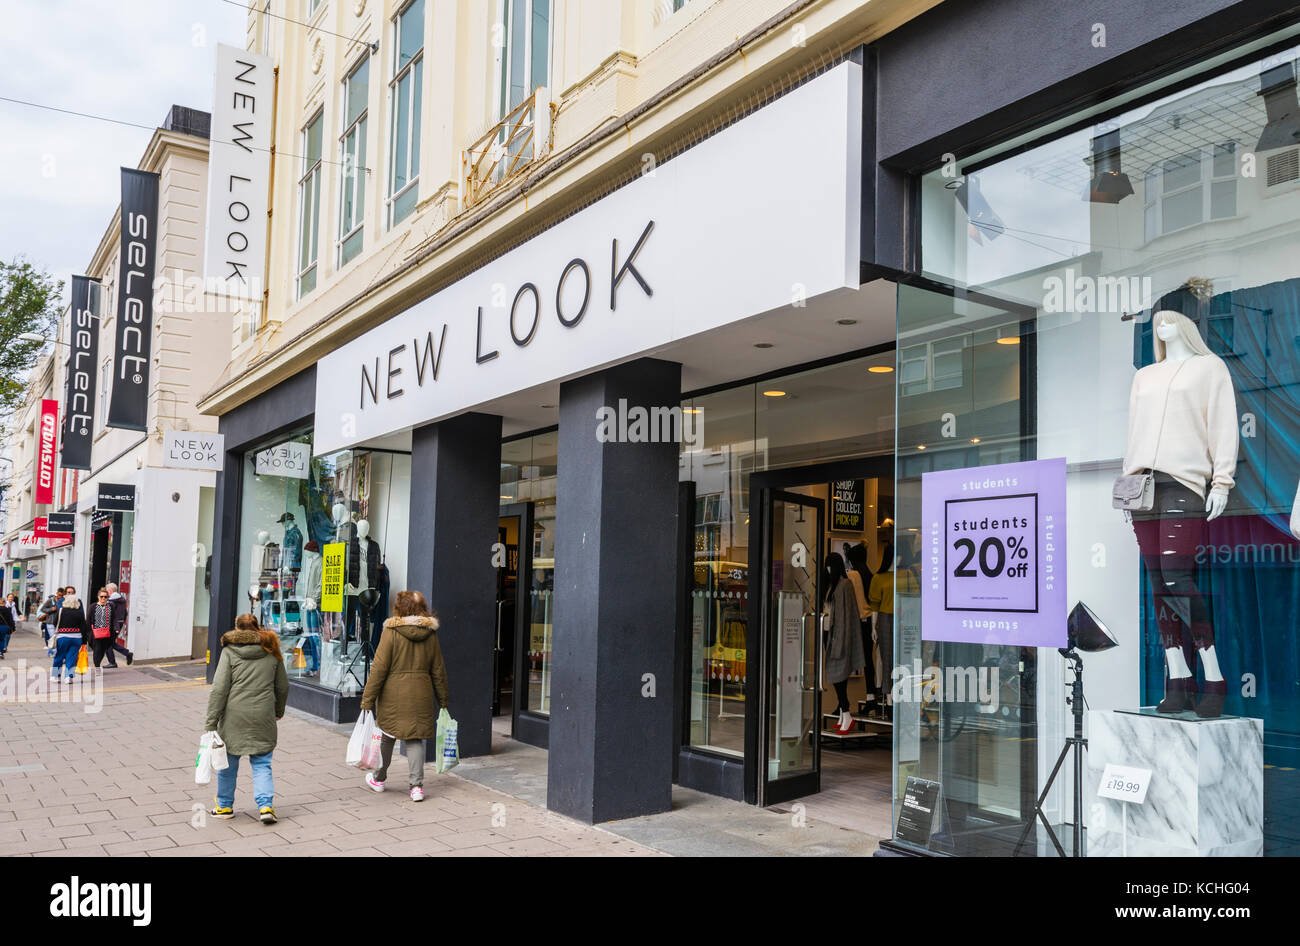 New Look shop entrance in Brighton, East Sussex, England, UK. Retail store. Stock Photo